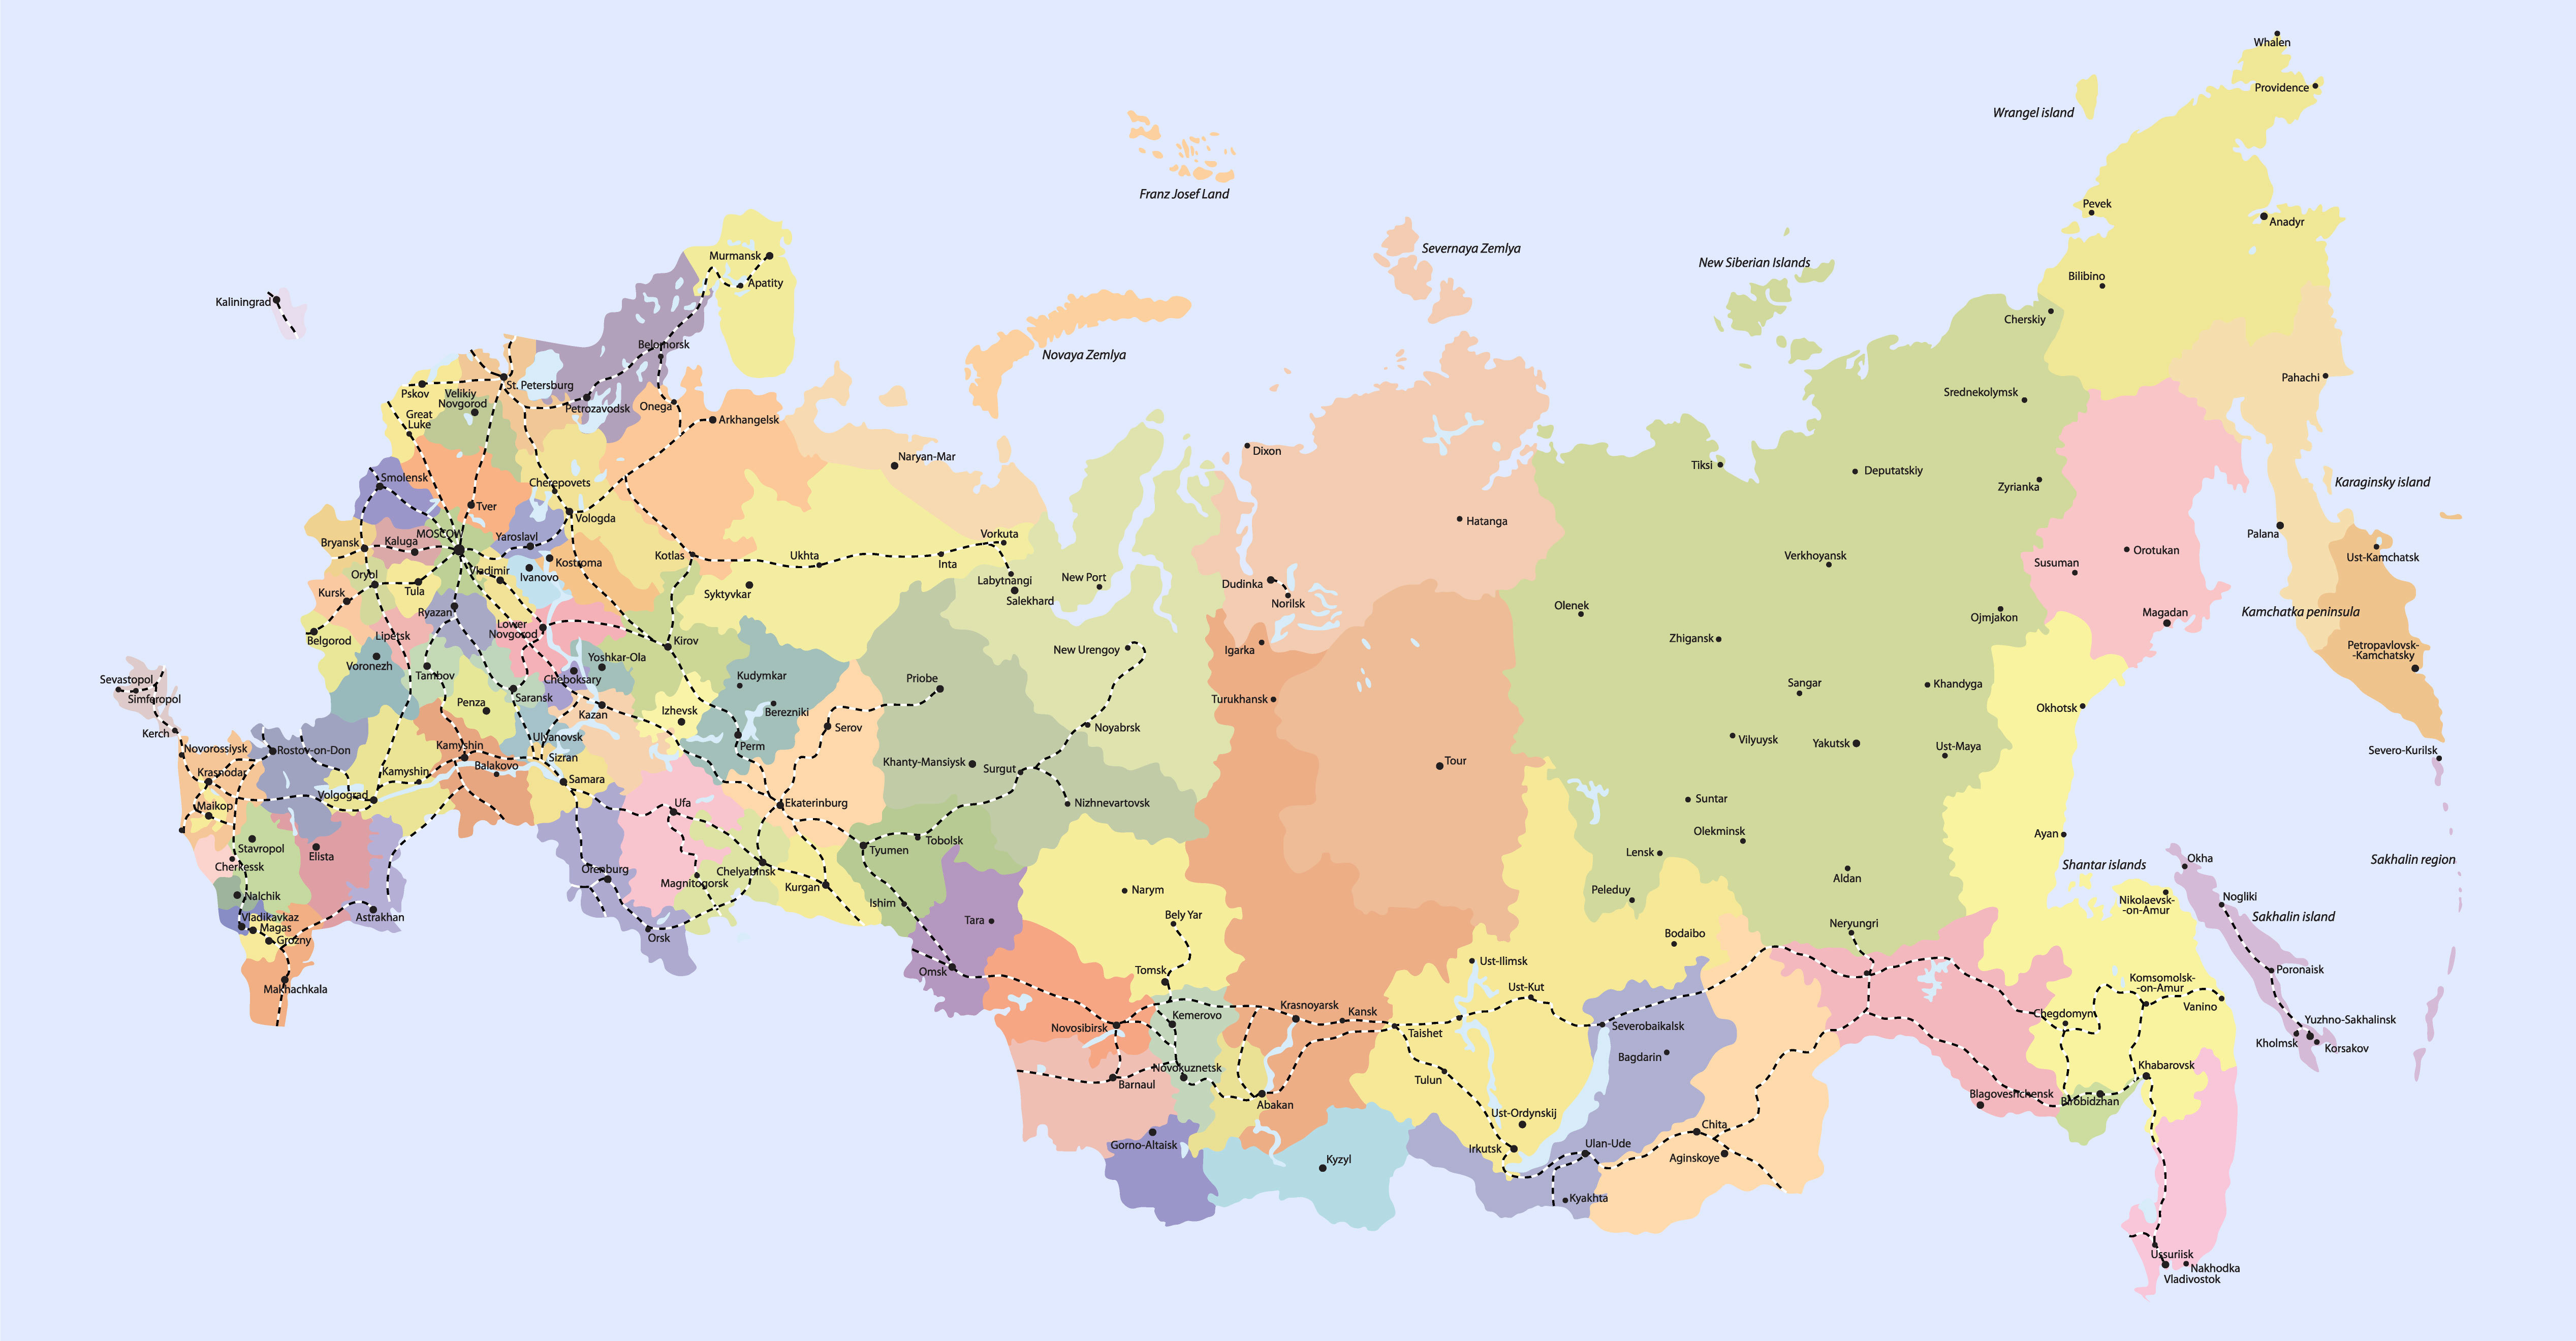 Russia Map Guide of the World